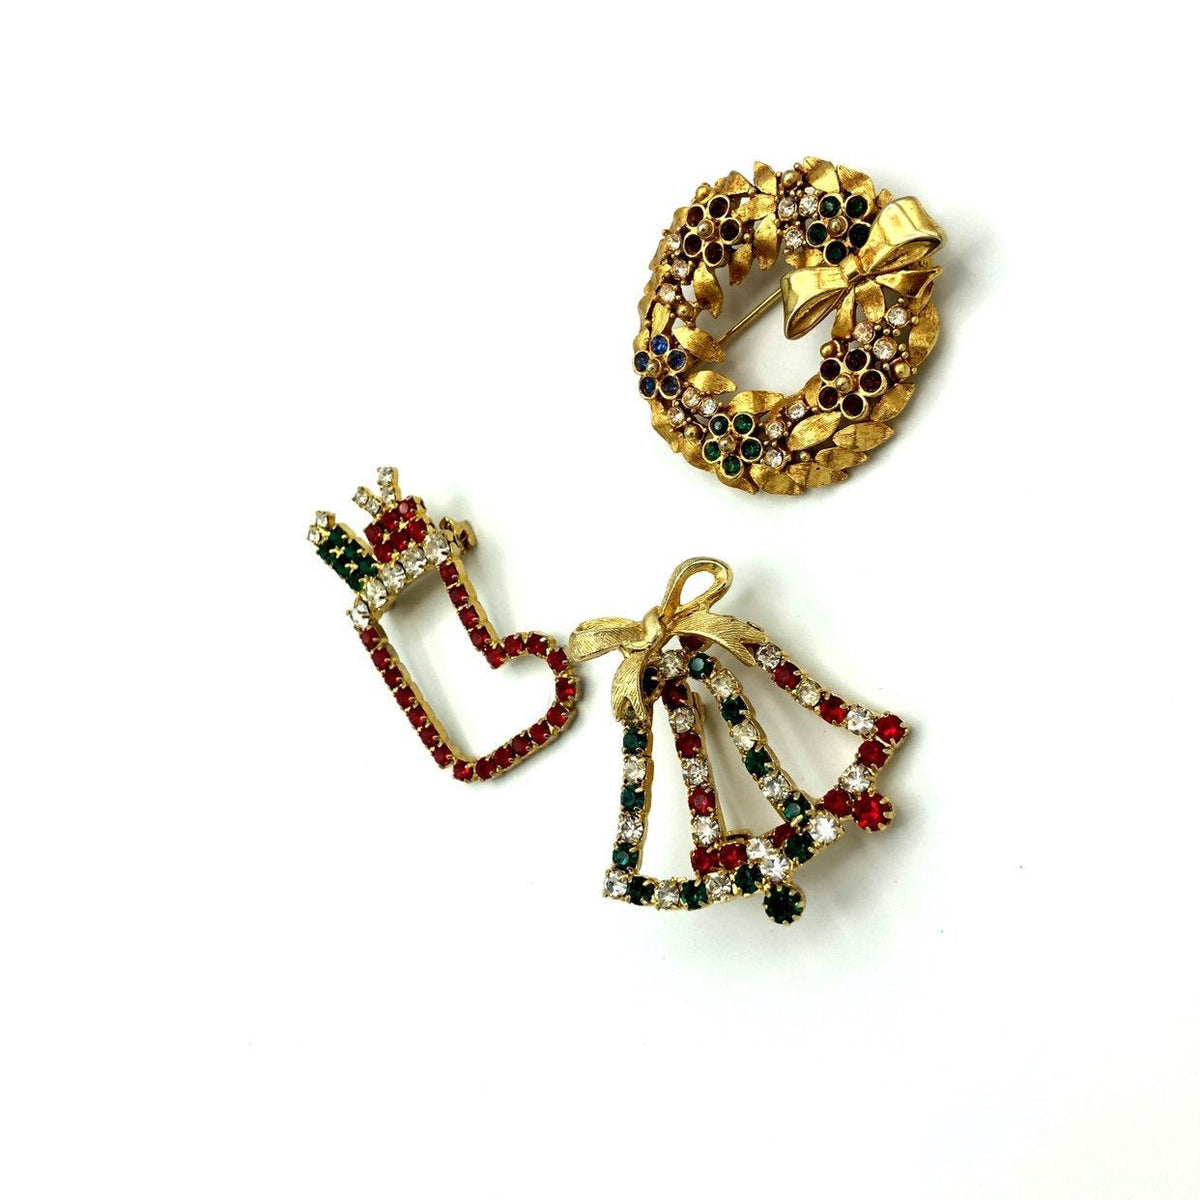 Vintage Holiday Brooch Trio Rhinestone Stocking Wreath Bells Christmas Scatter Pins - 24 Wishes Vintage Jewelry